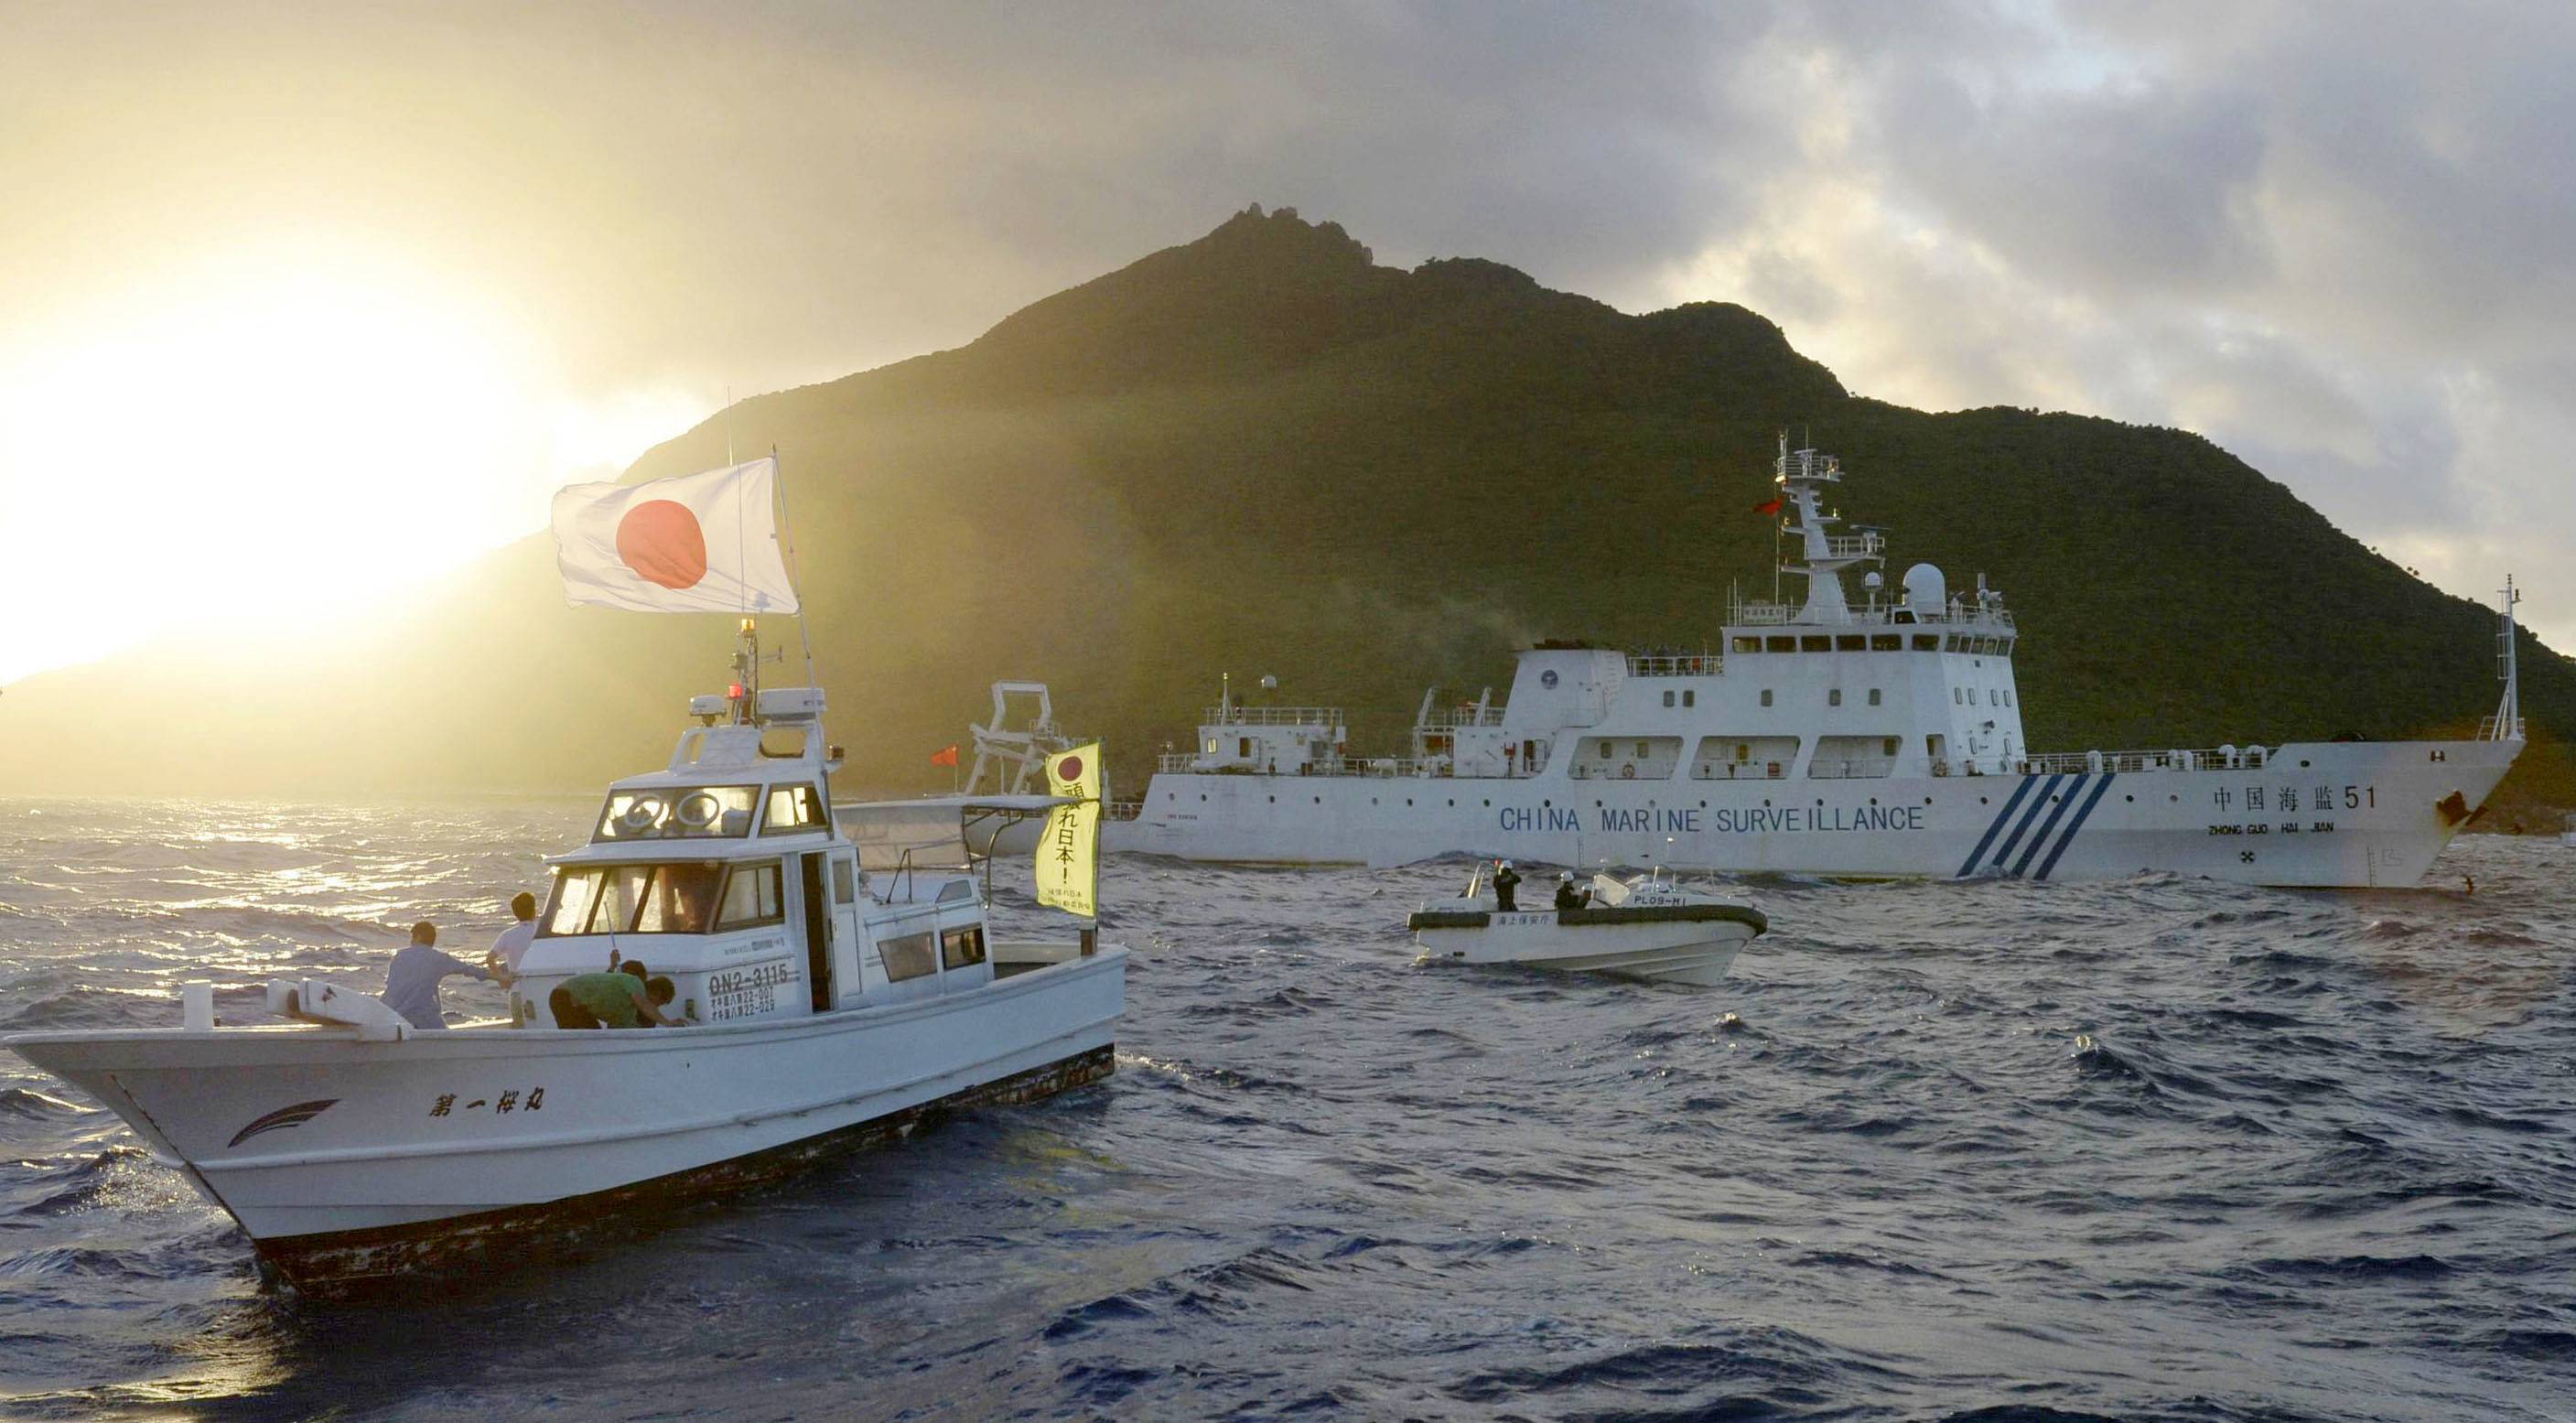 The territorial dispute over the Senkaku Islands has been partly responsible for changing attitudes toward China in Japan, with many now seeing Beijing as a threat. | KYODO